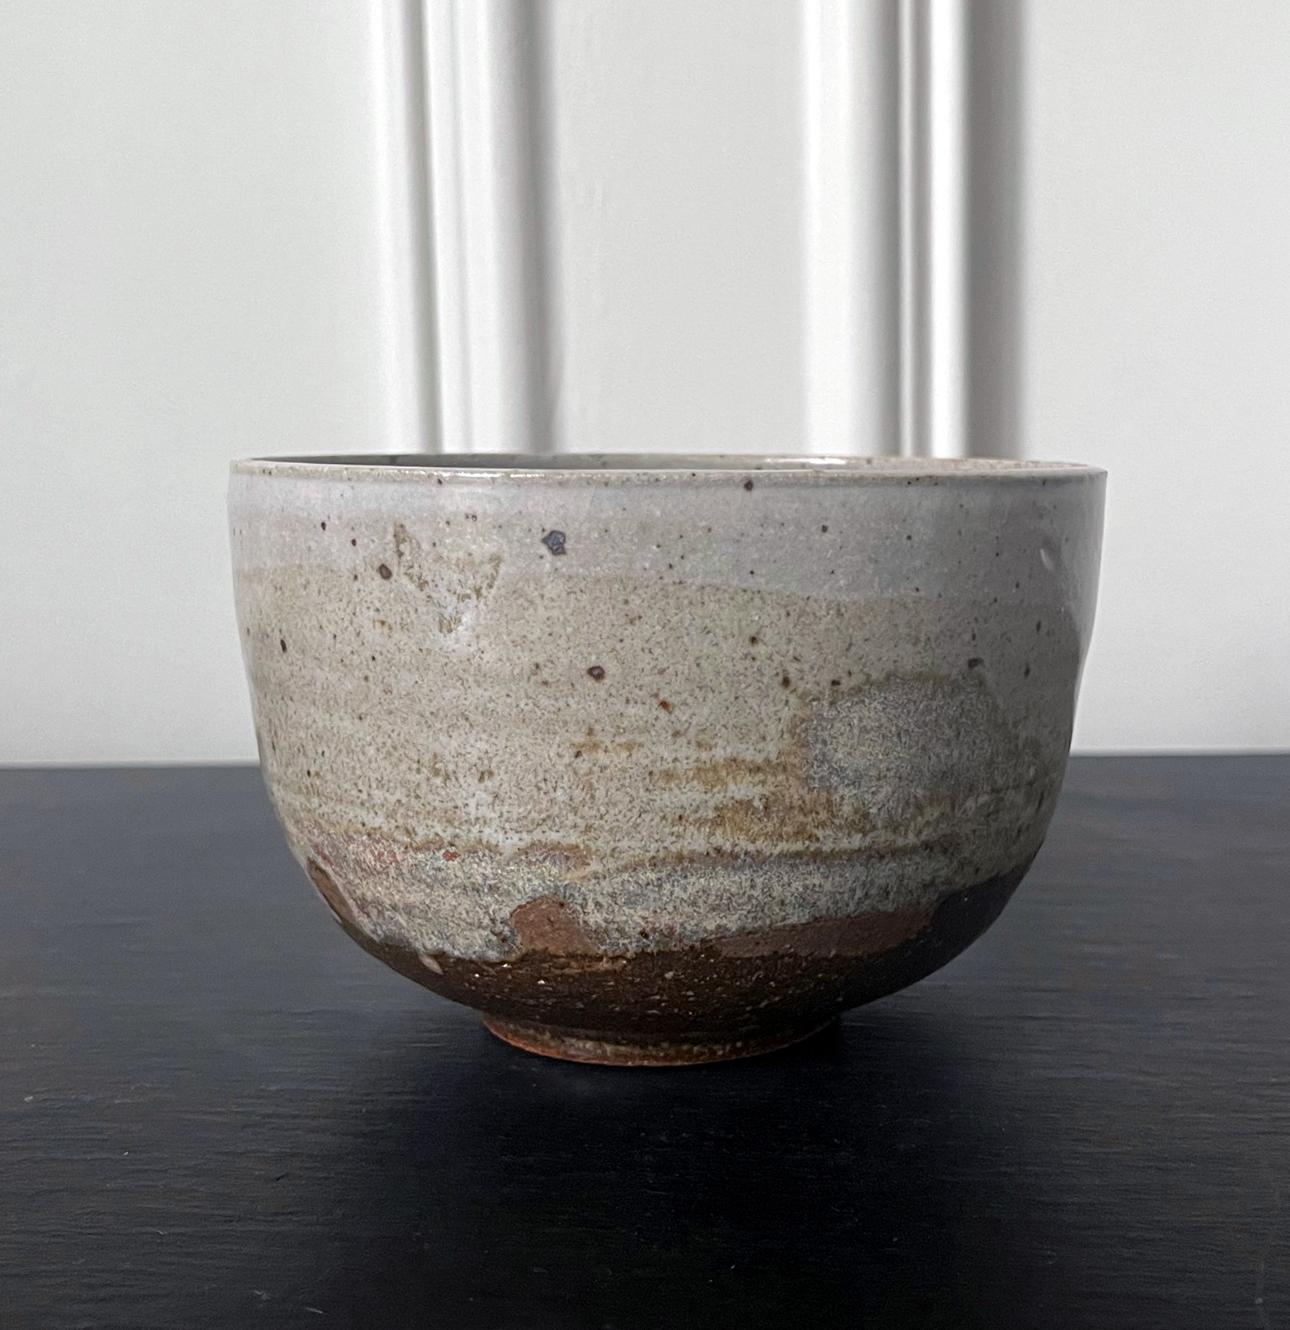 A glazed ceramic tea bowl (chawan) by Japanese American artist Toshiko Takaezu (American, 1922 - 2011). The well-balanced form is hand built and shows slight irregularity, further accentuated with wheel grooves. The surface is covered with